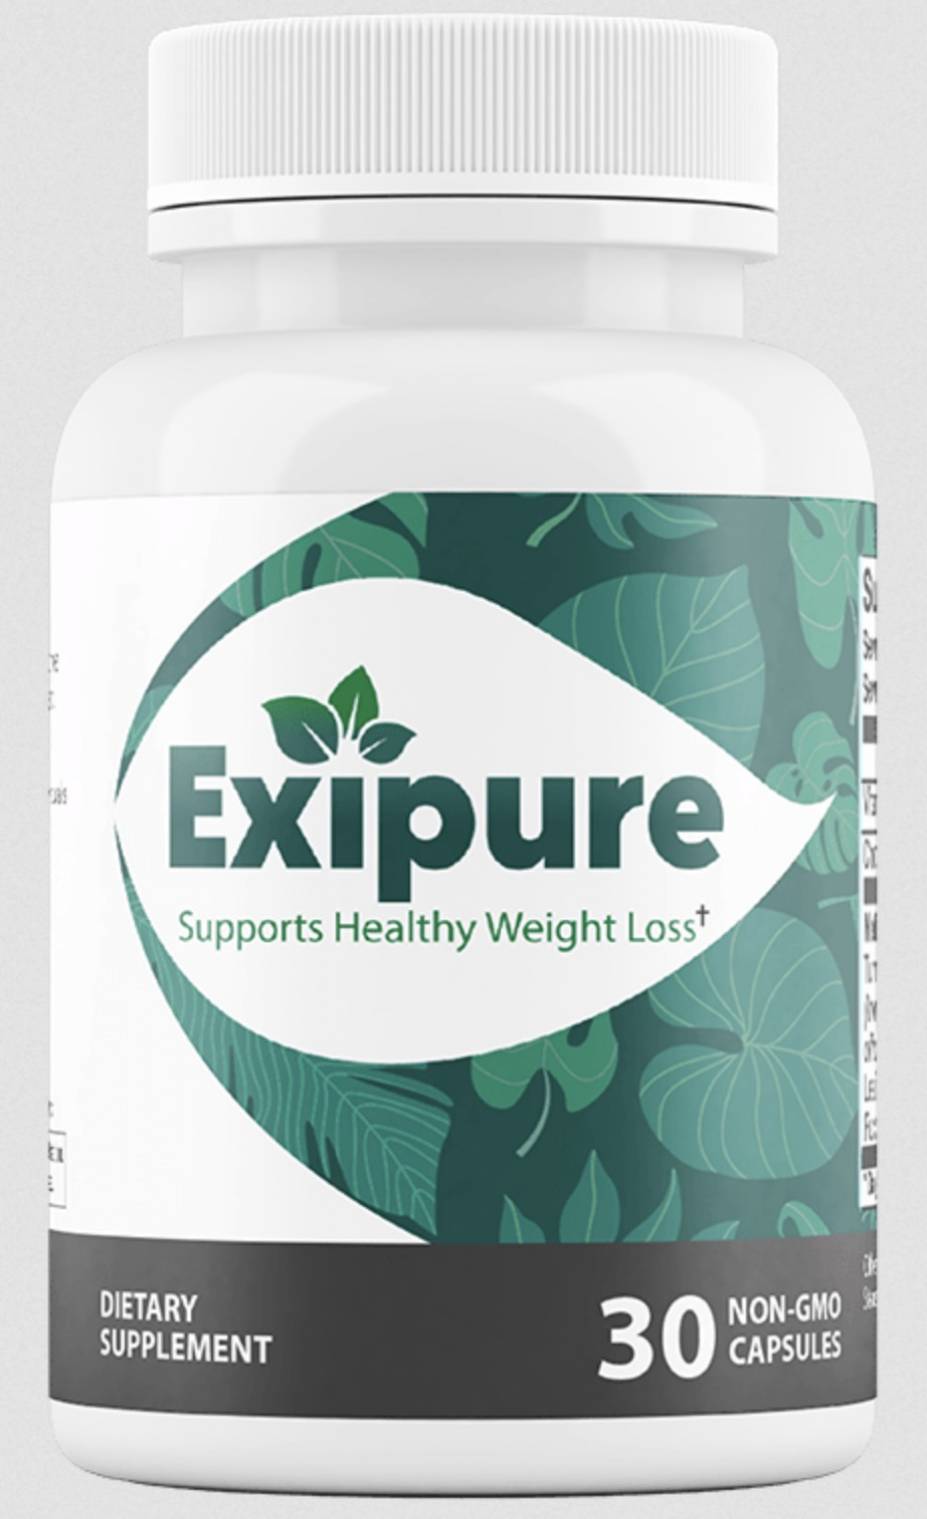 How Safe Is Exipure